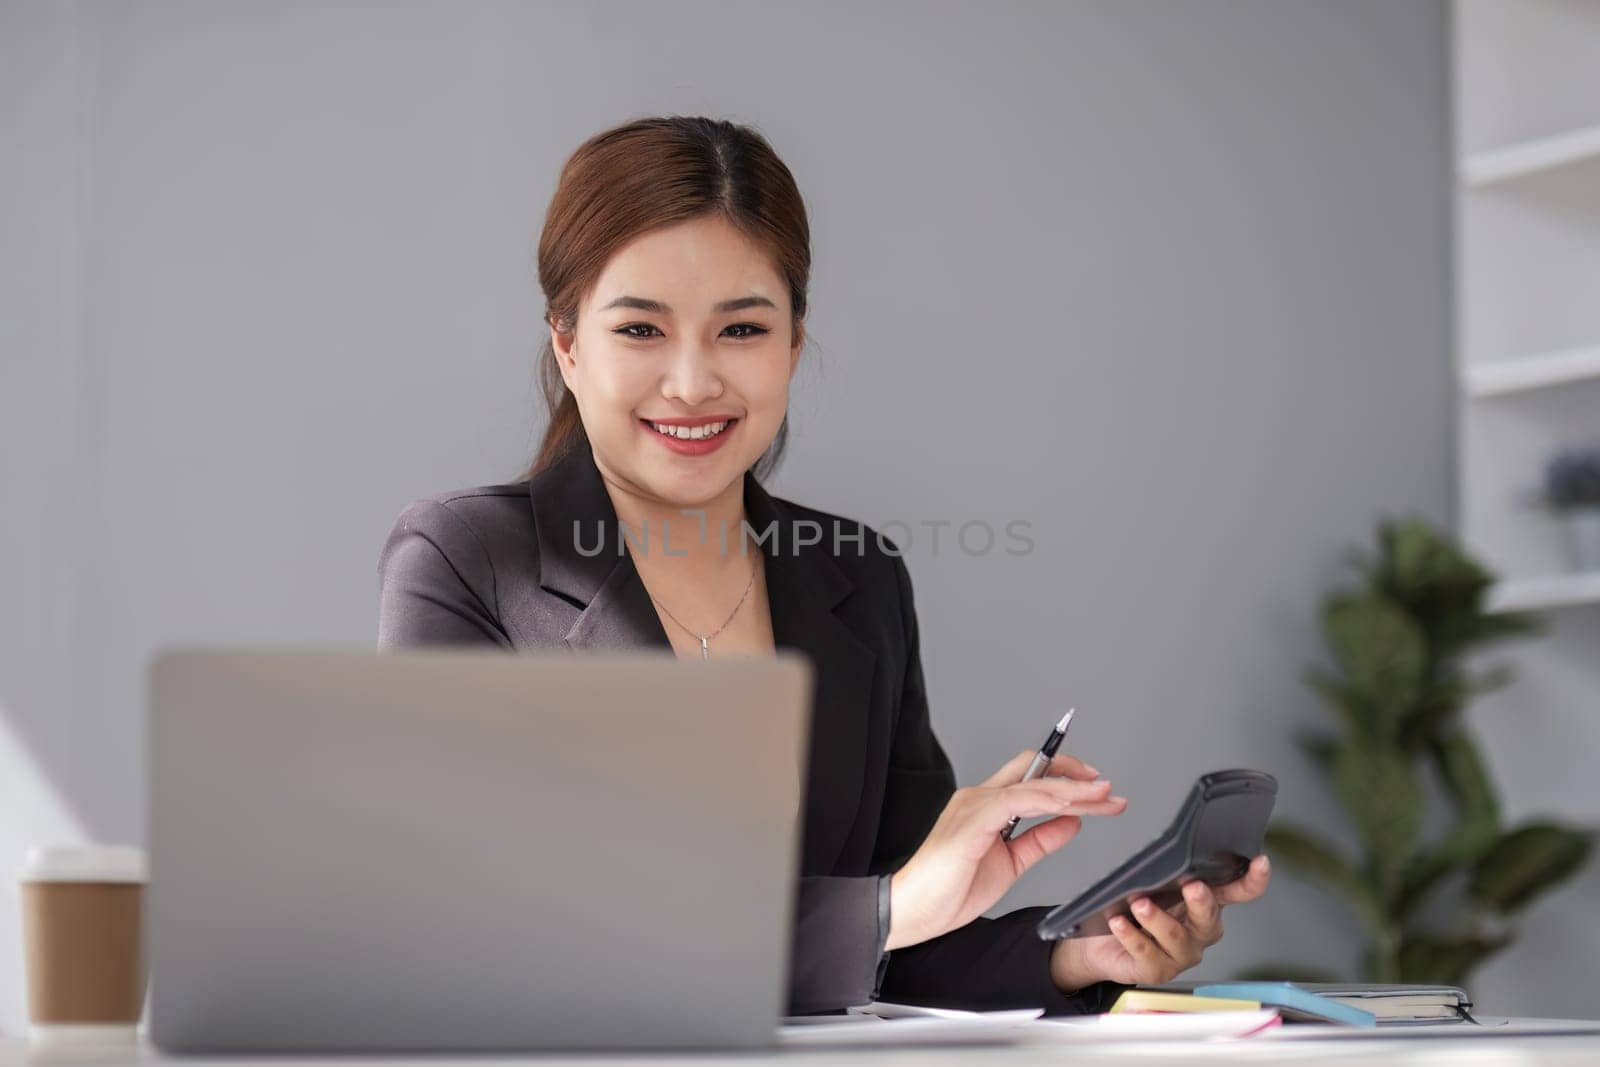 Businesswoman using laptop and mobile phone talking about work and managing company business.